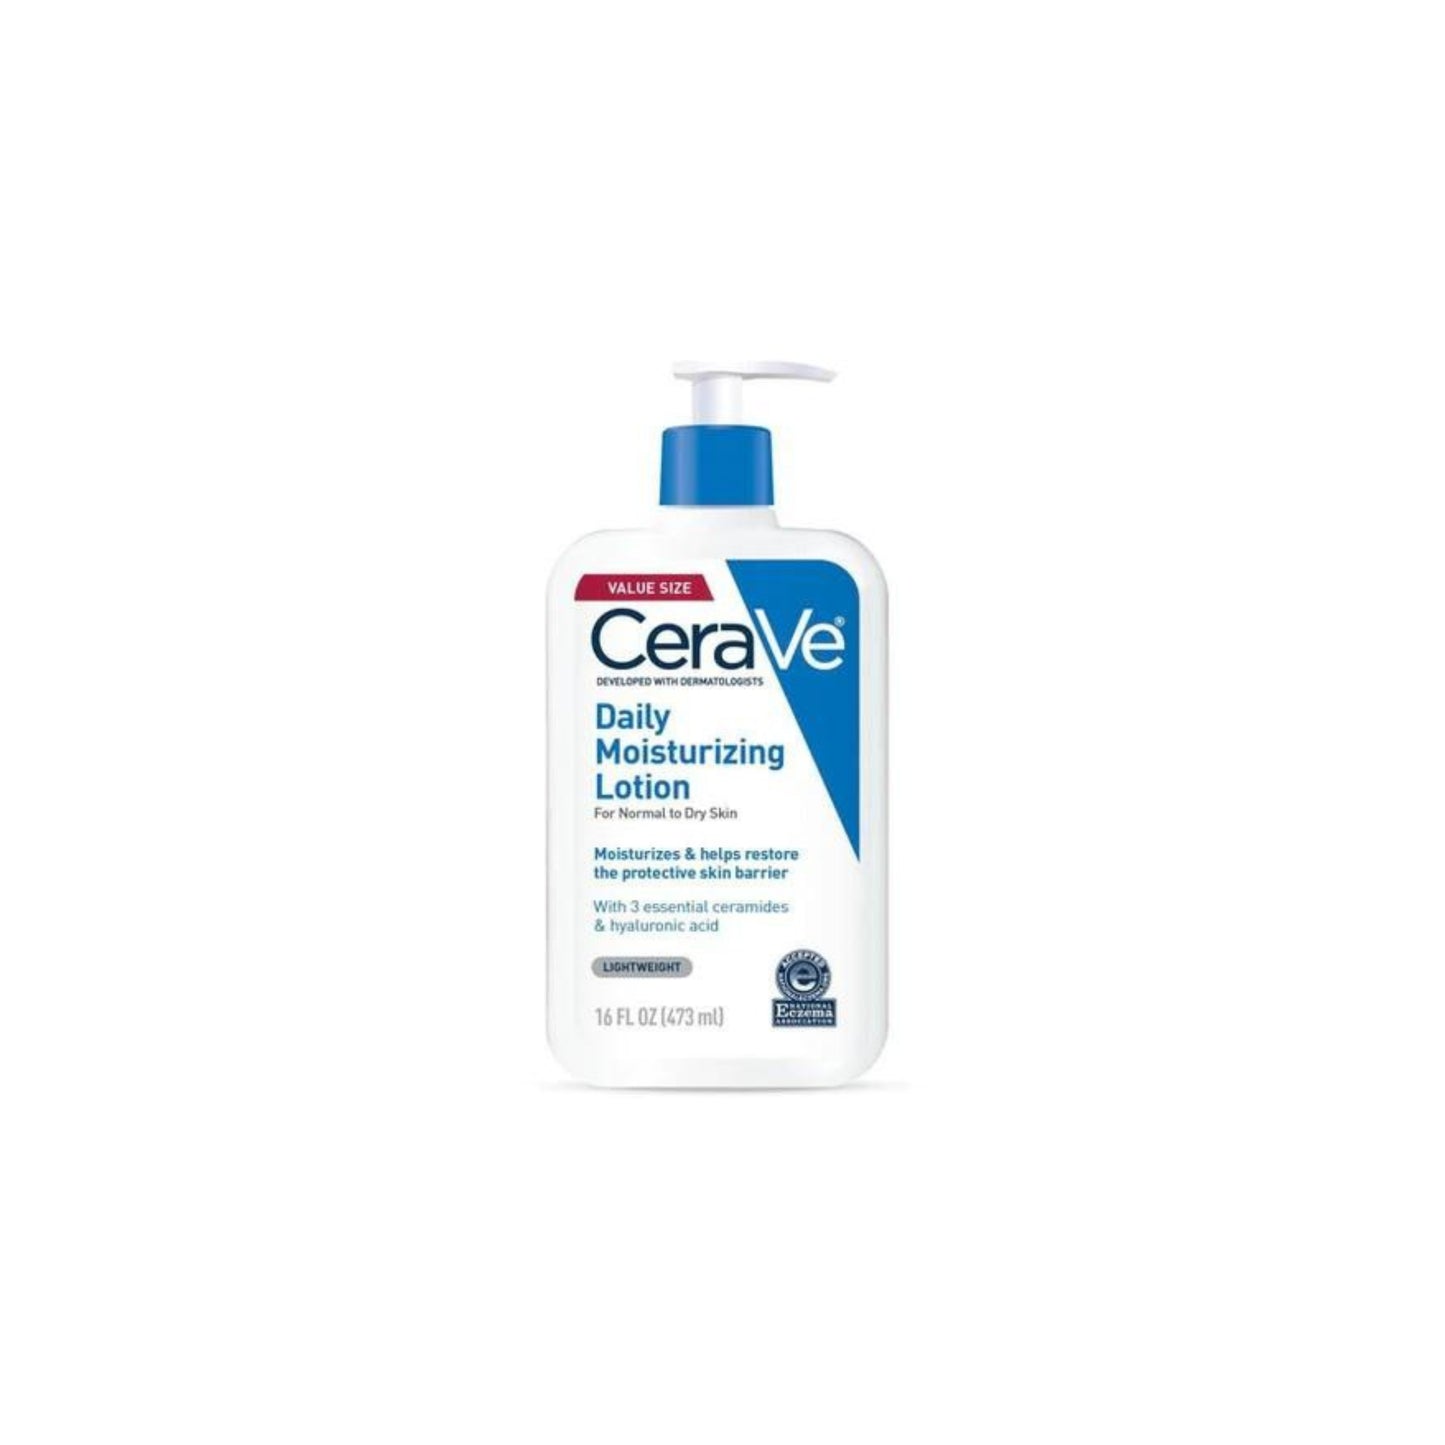 CeraVe | Daily Moisturizing Lotion for Dry Skin